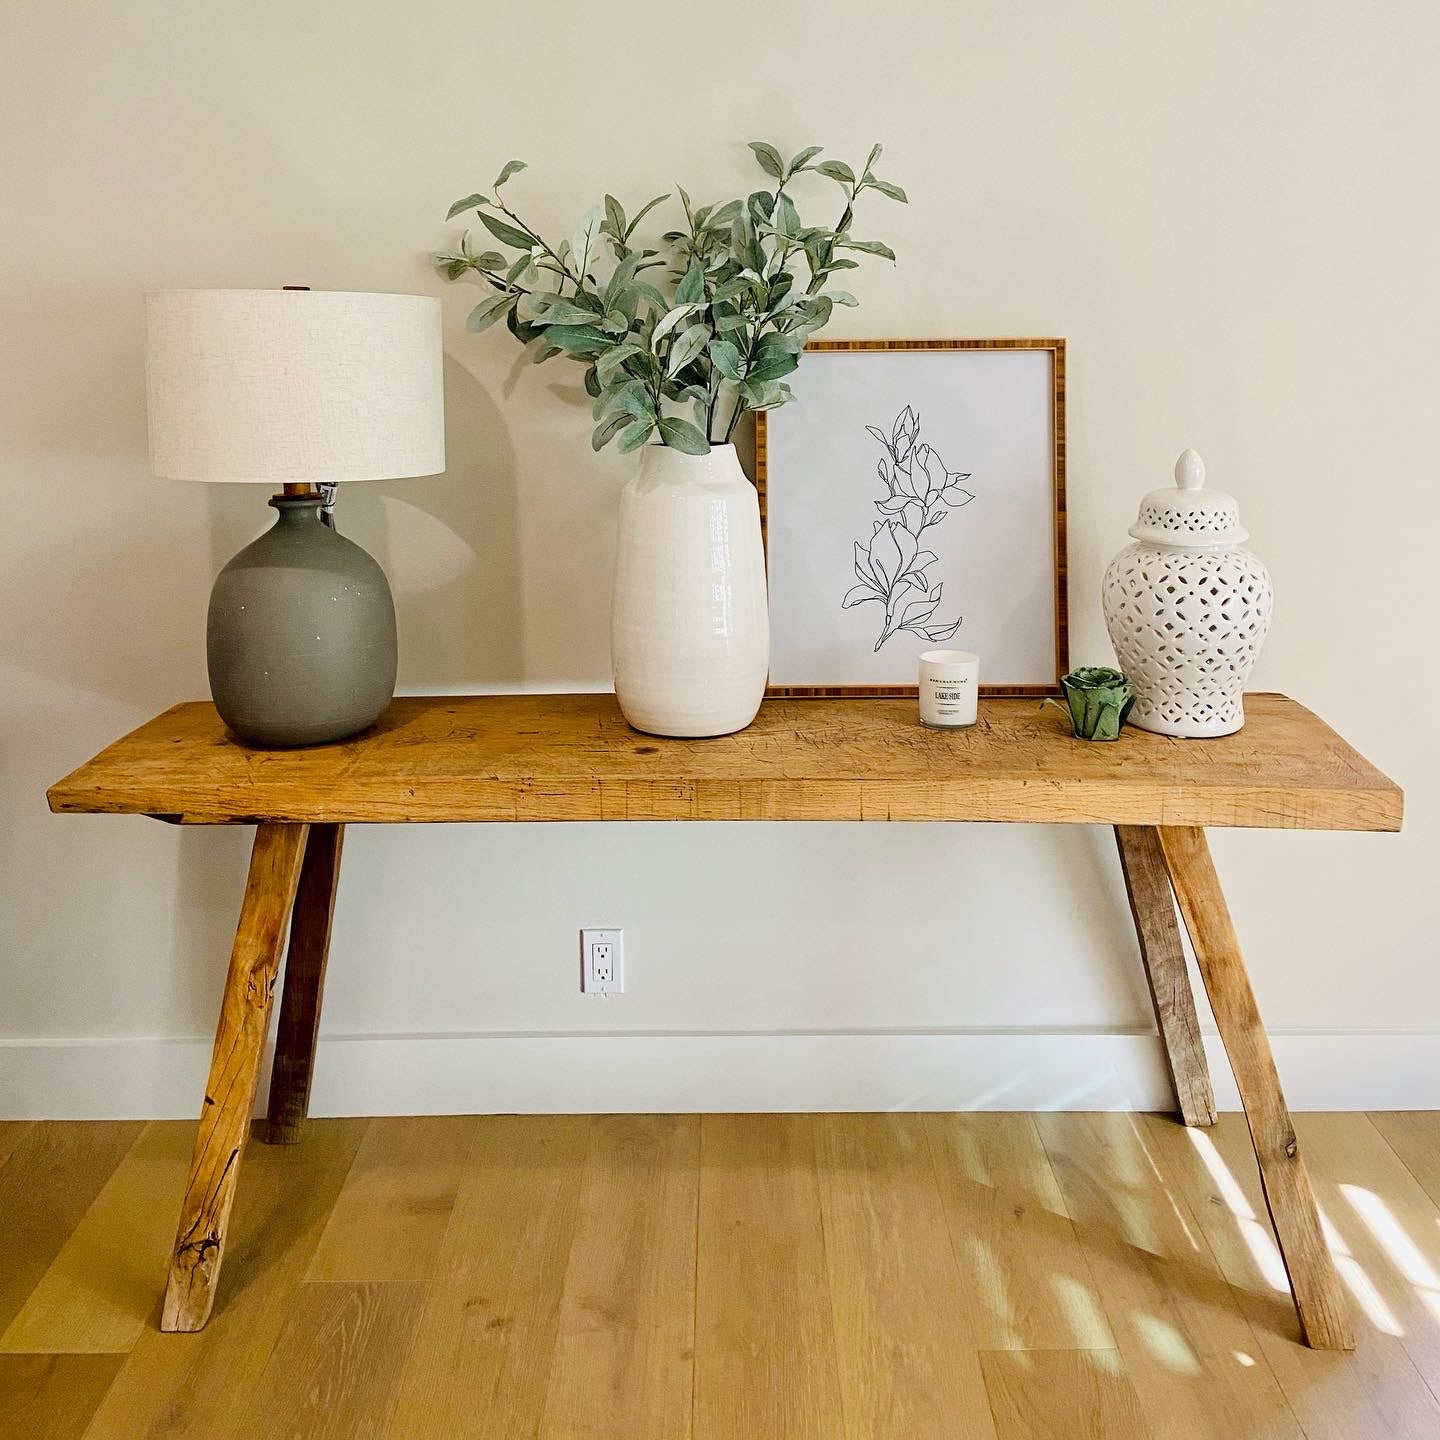 Vintage Reclaimed Console Table - 70"